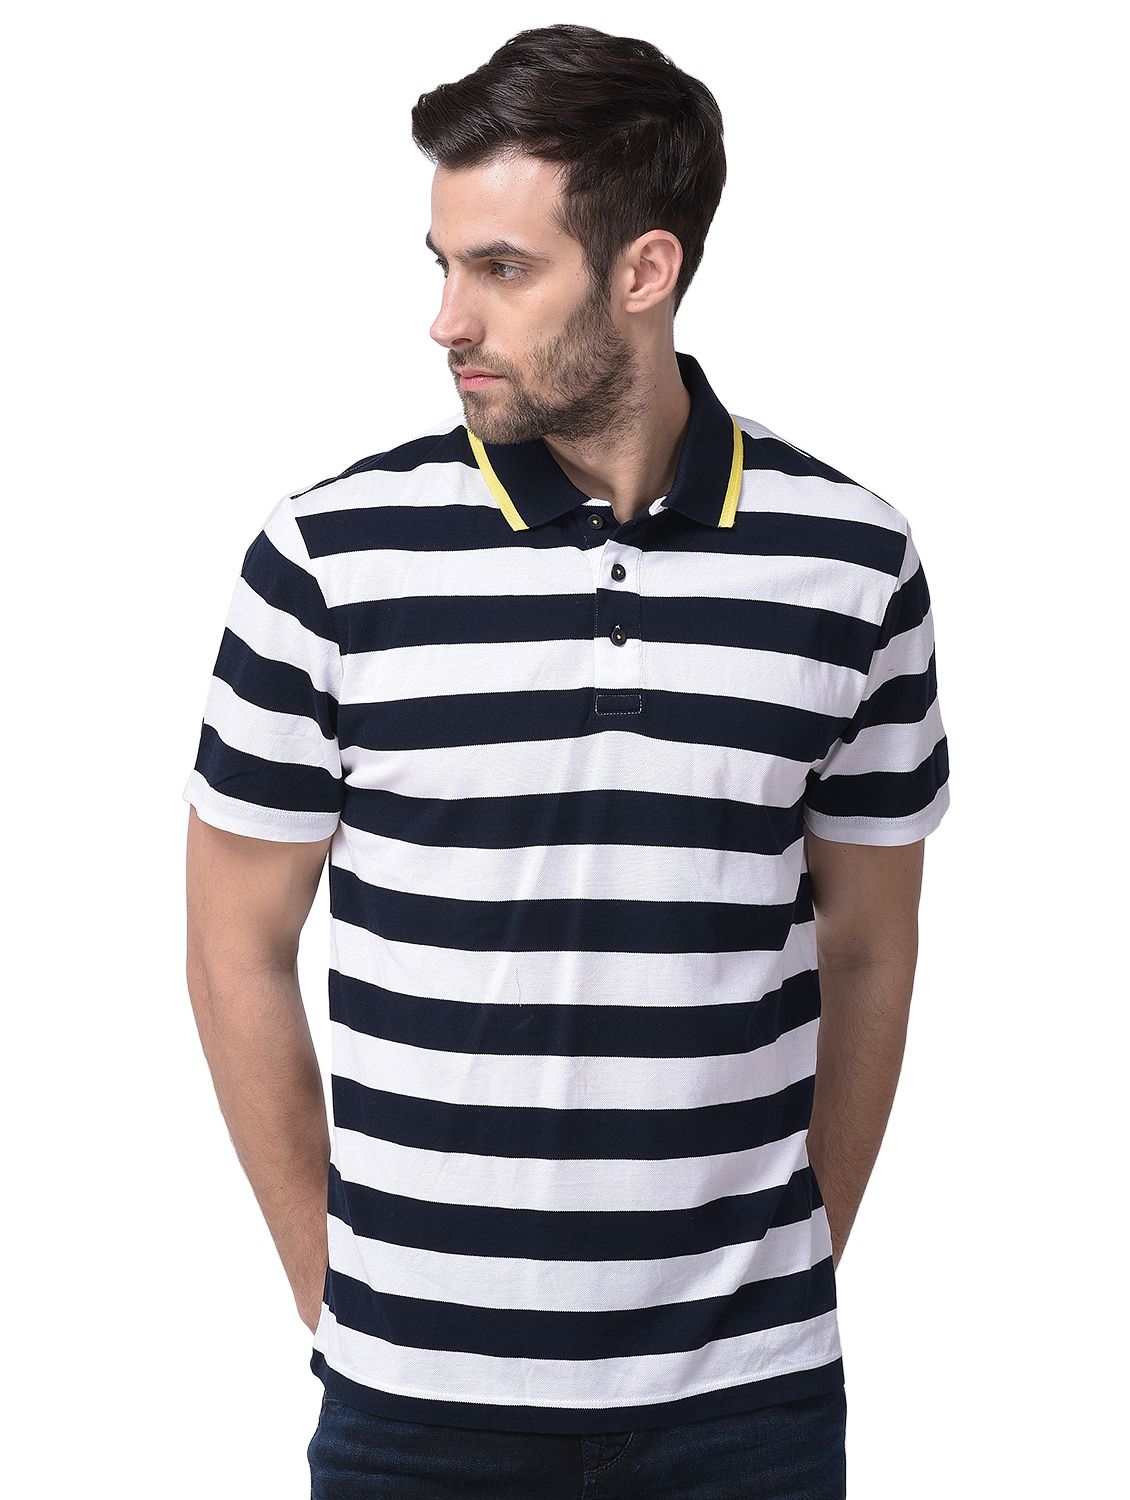 Navy and white t-shirt for men